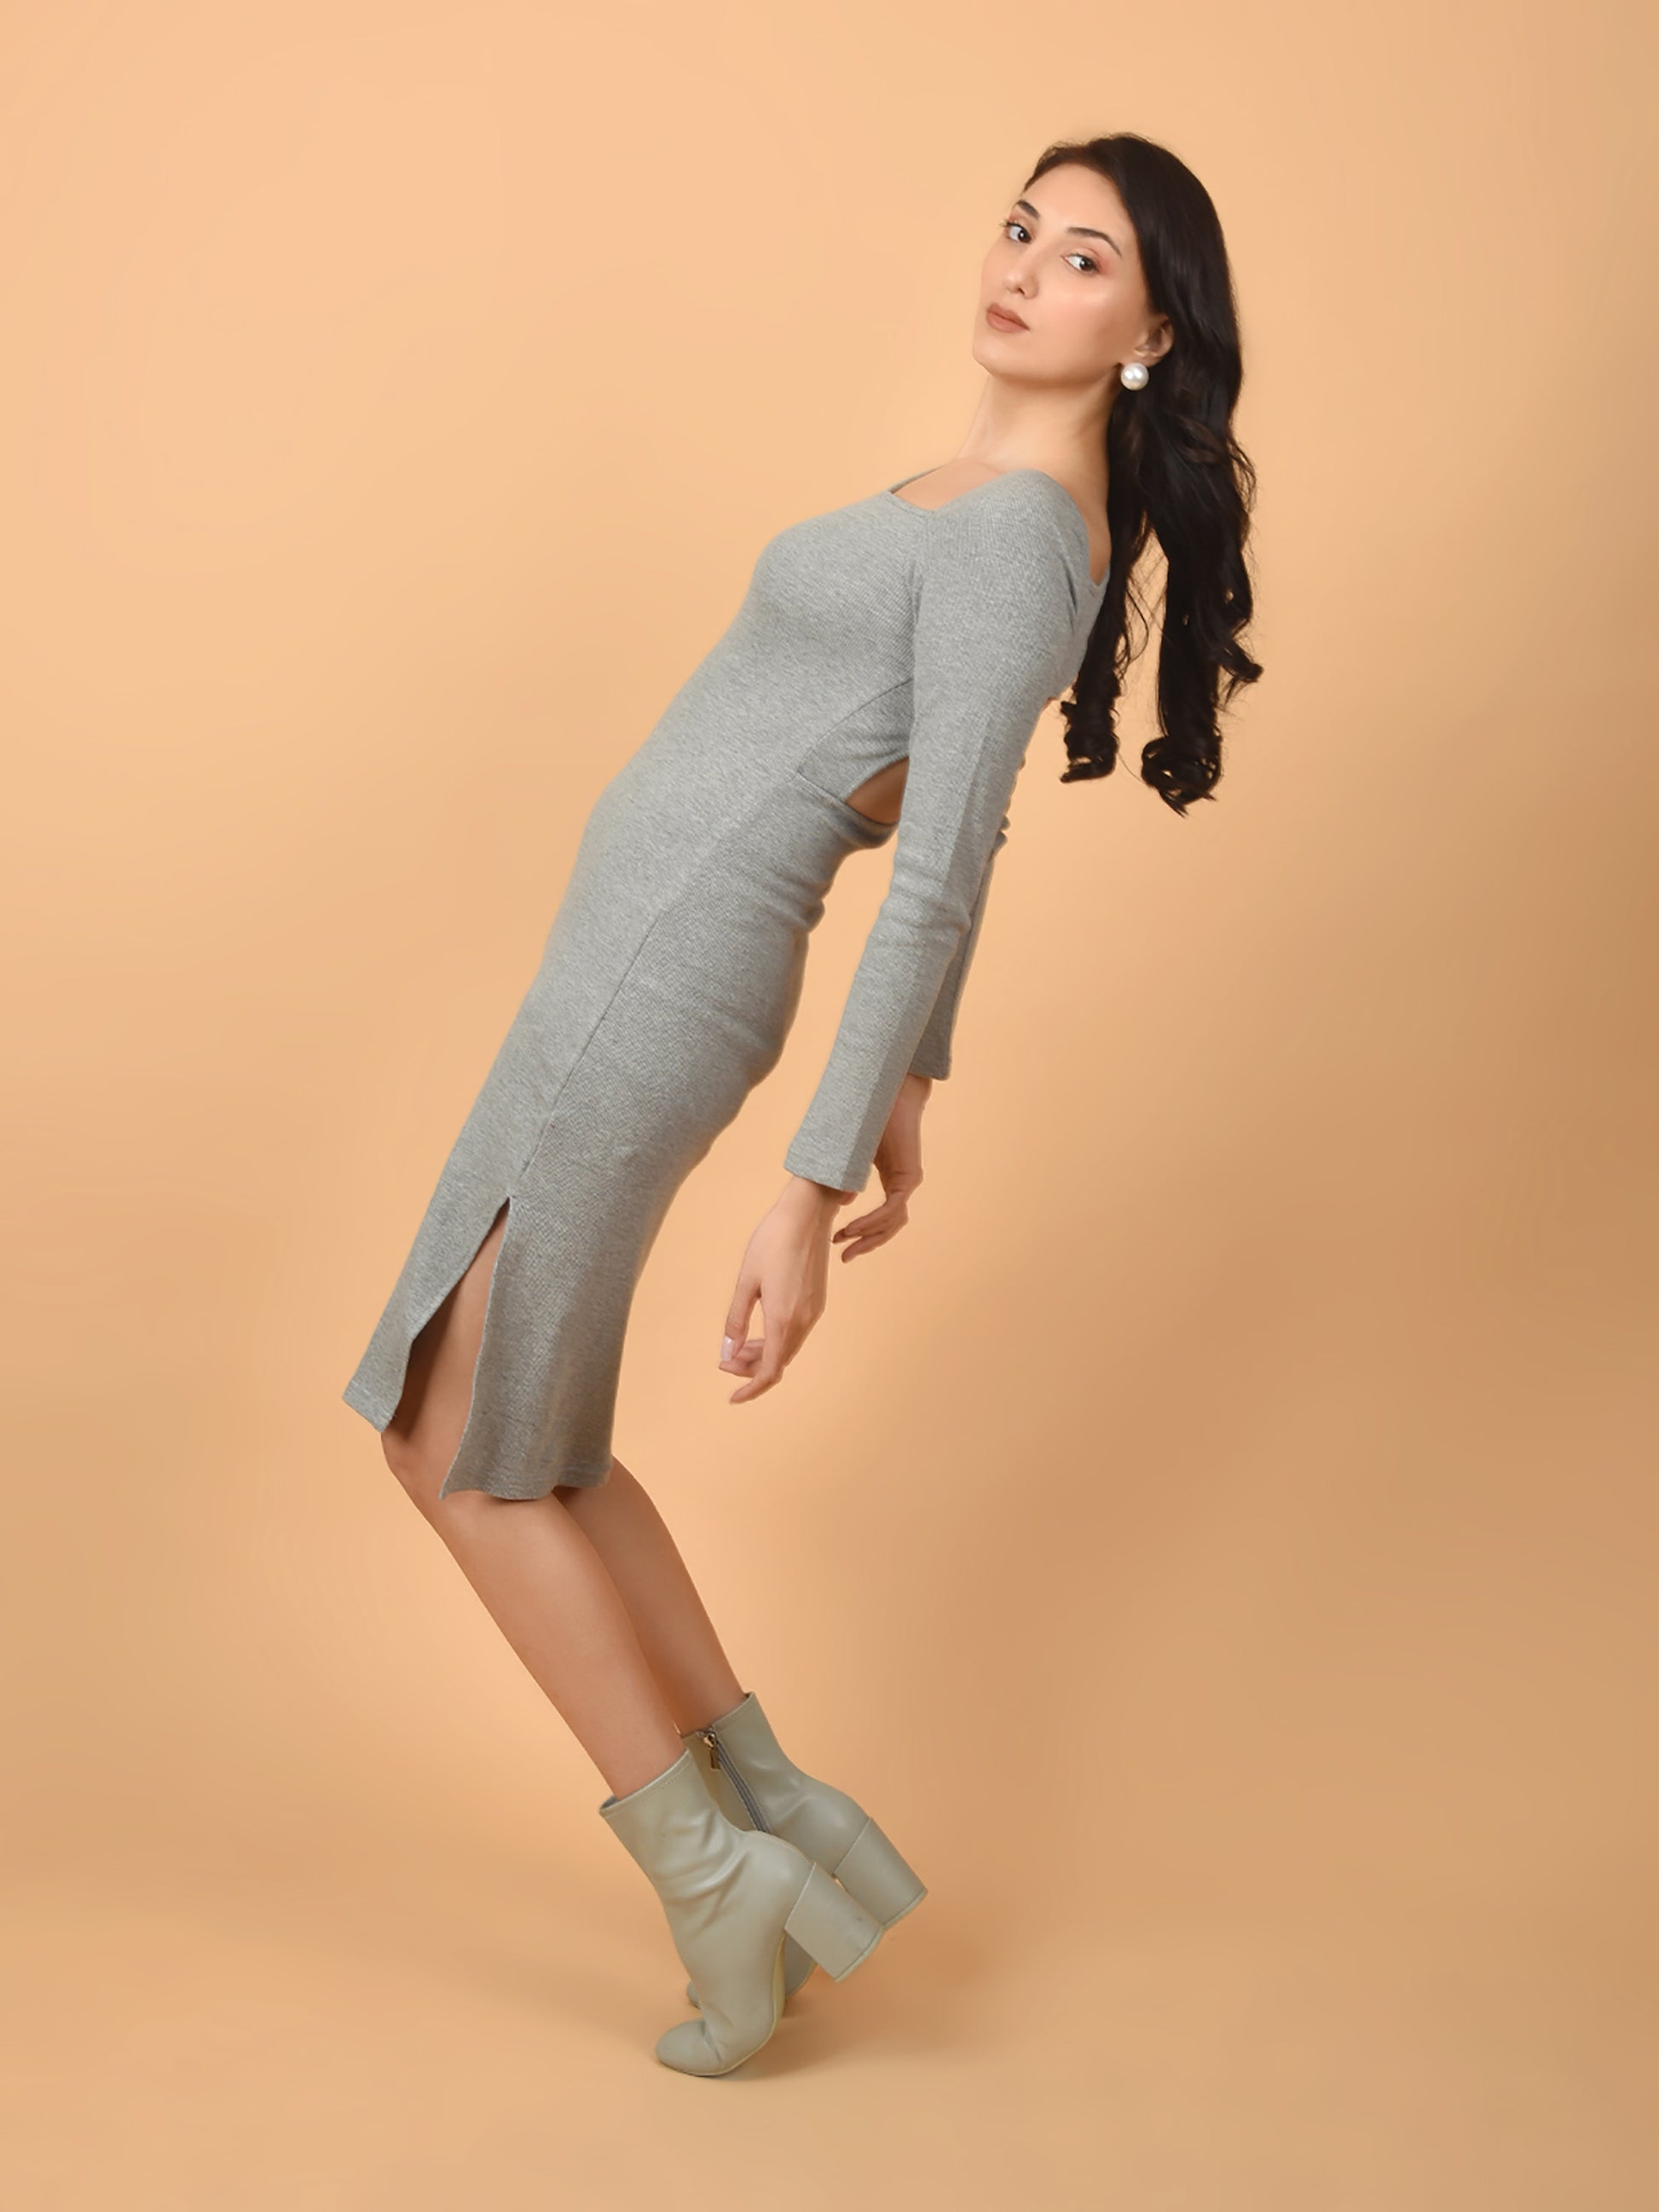 Flawless Women Cut-Out Grey Dress | COVERUP Being Flawless